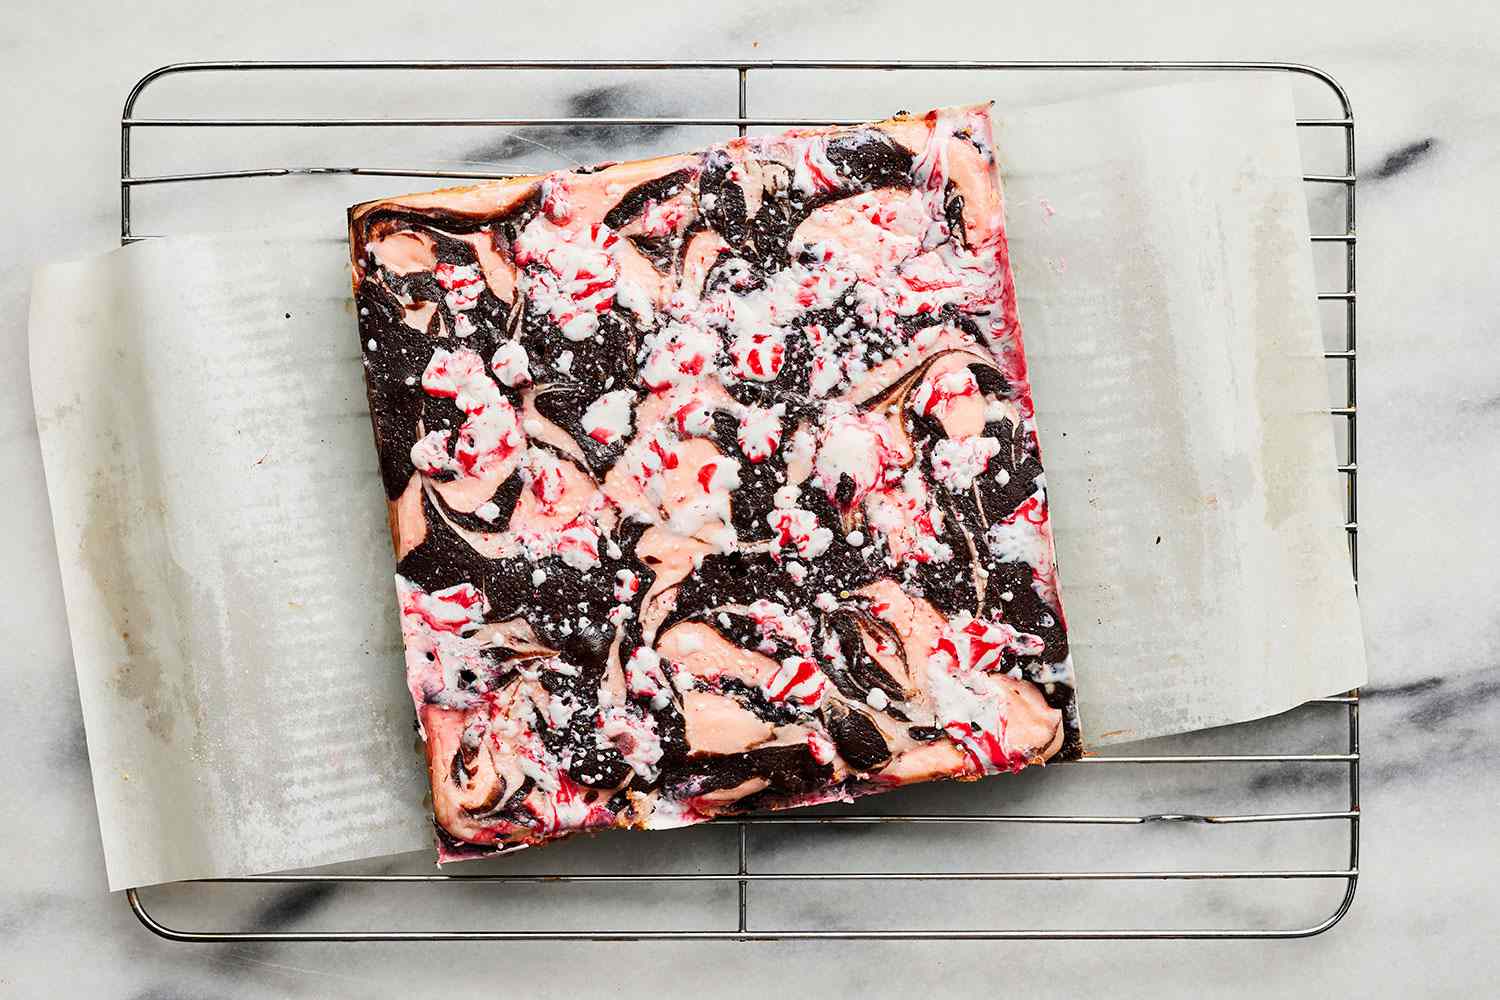 finished peppermint swirl brownie lifted from pan using parchment paper